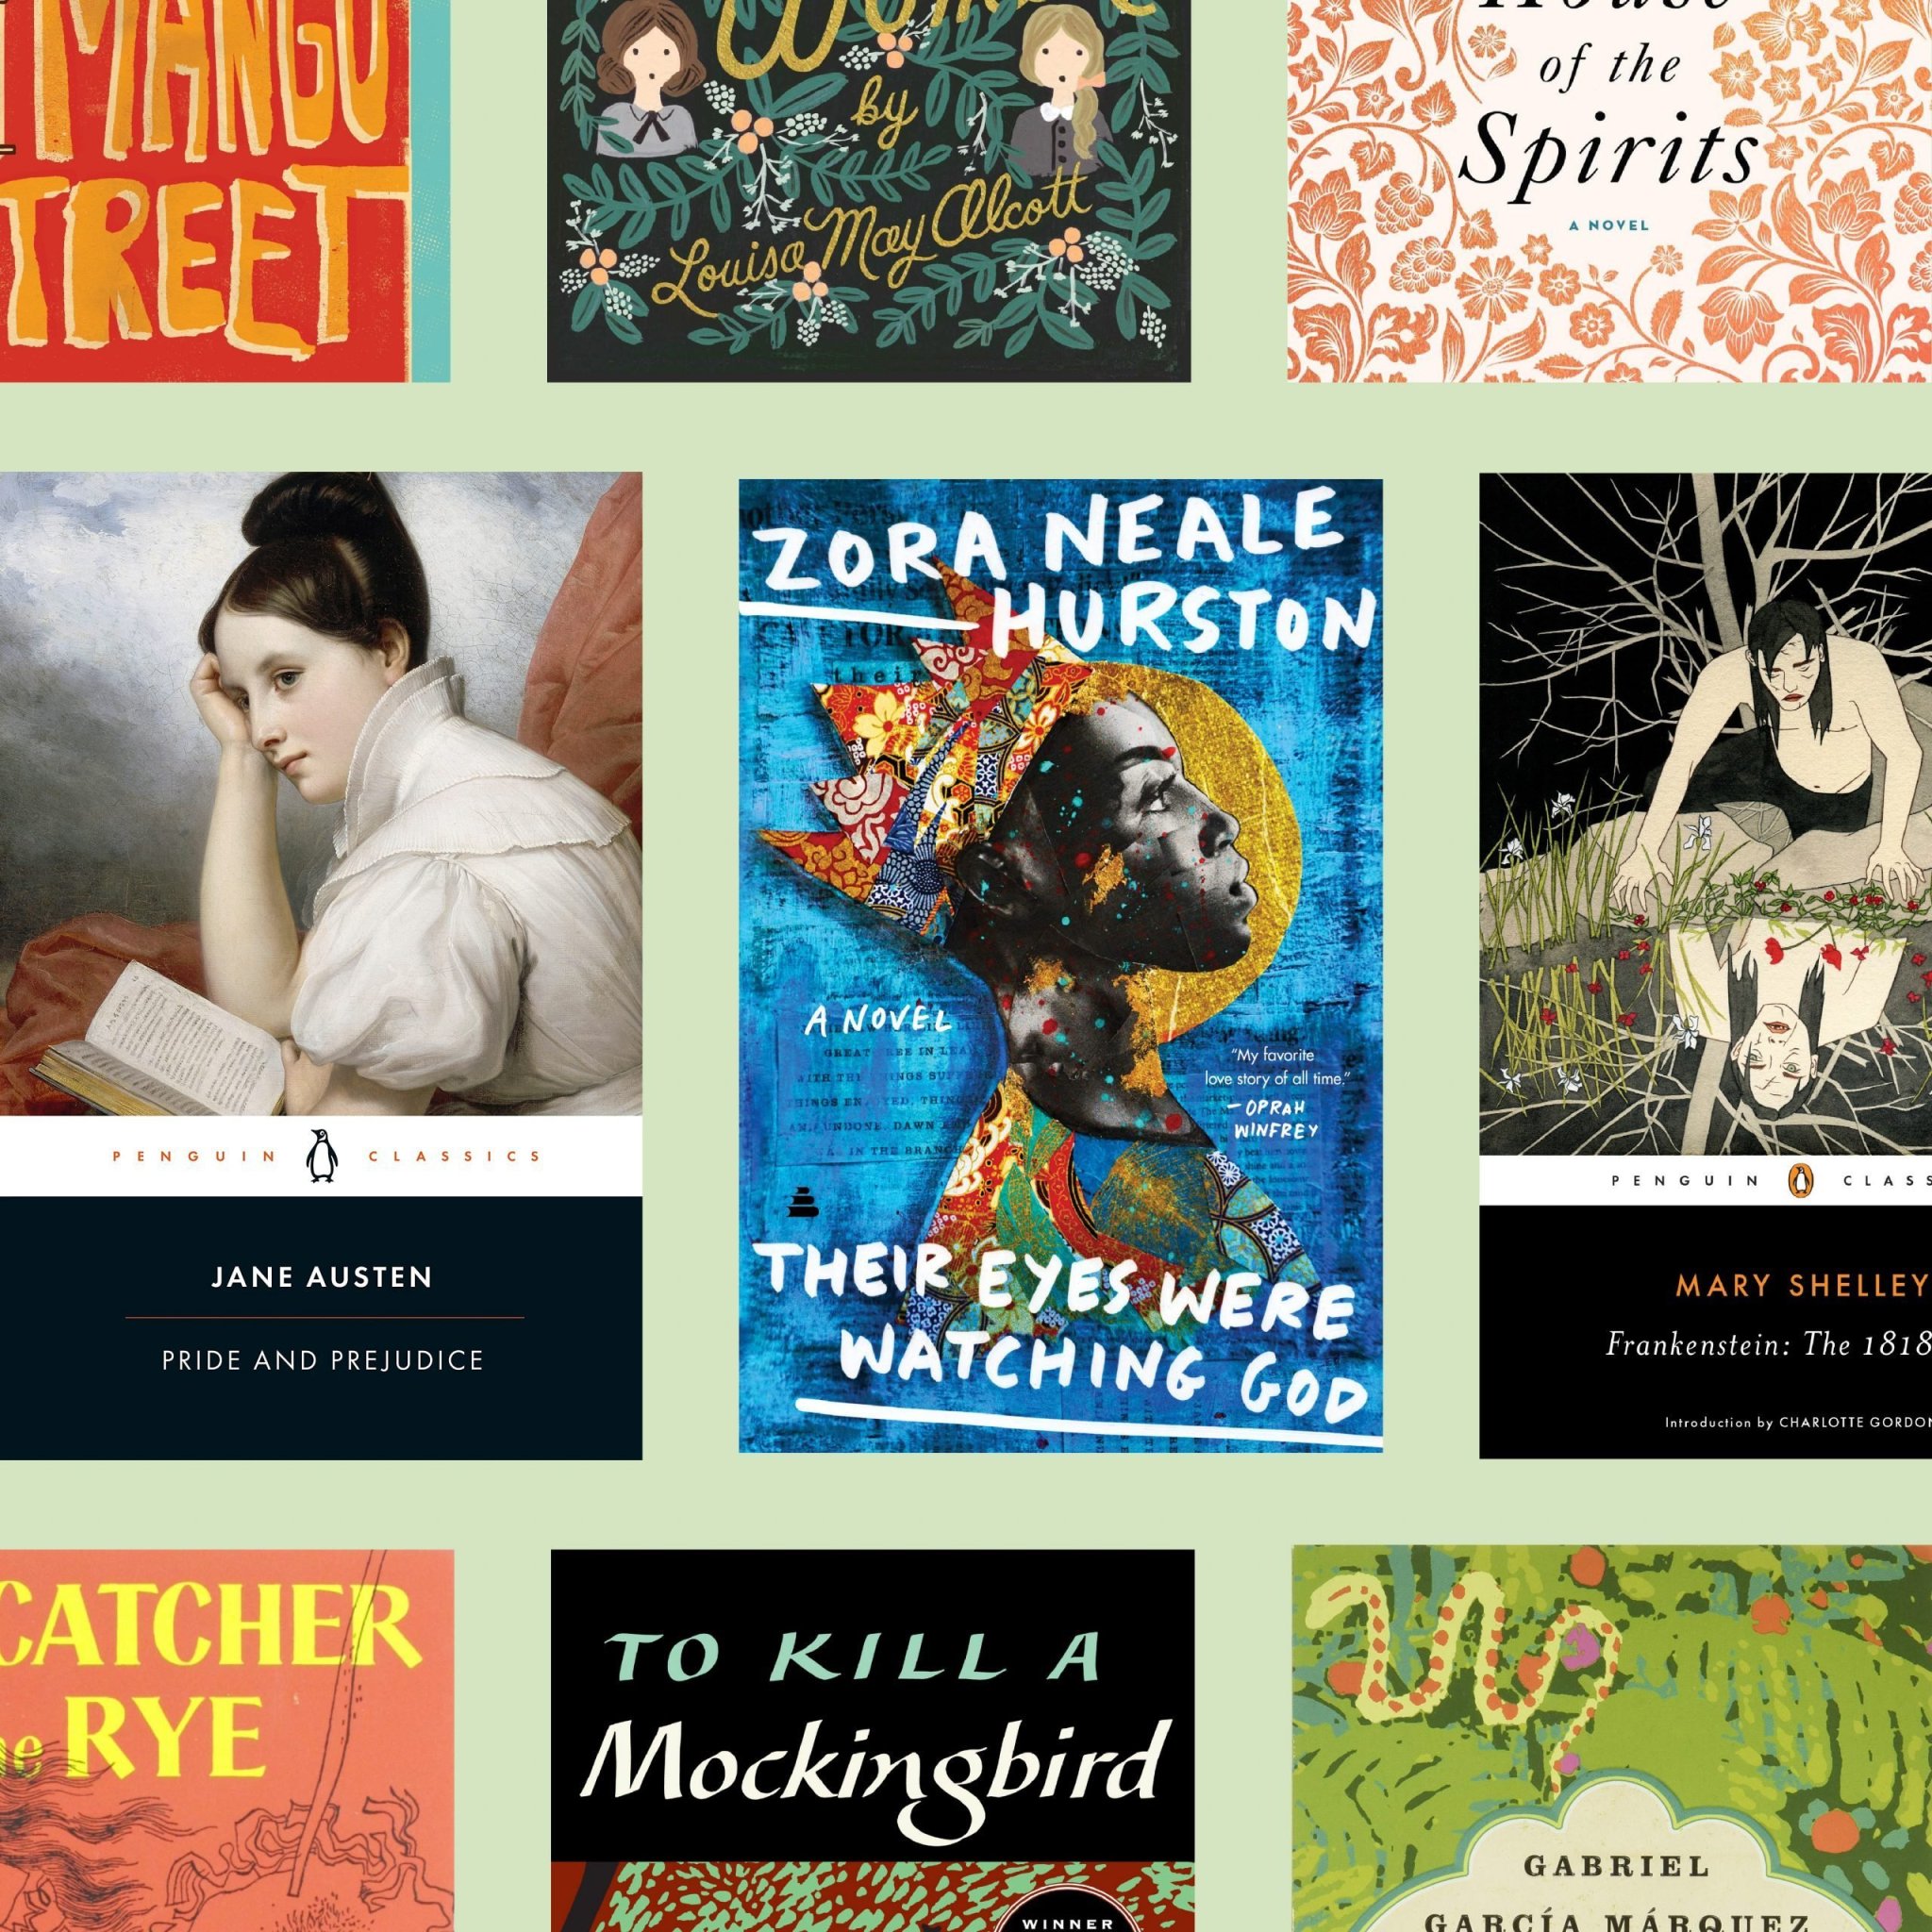 21 Classic Books Everyone Should Read at Least Once